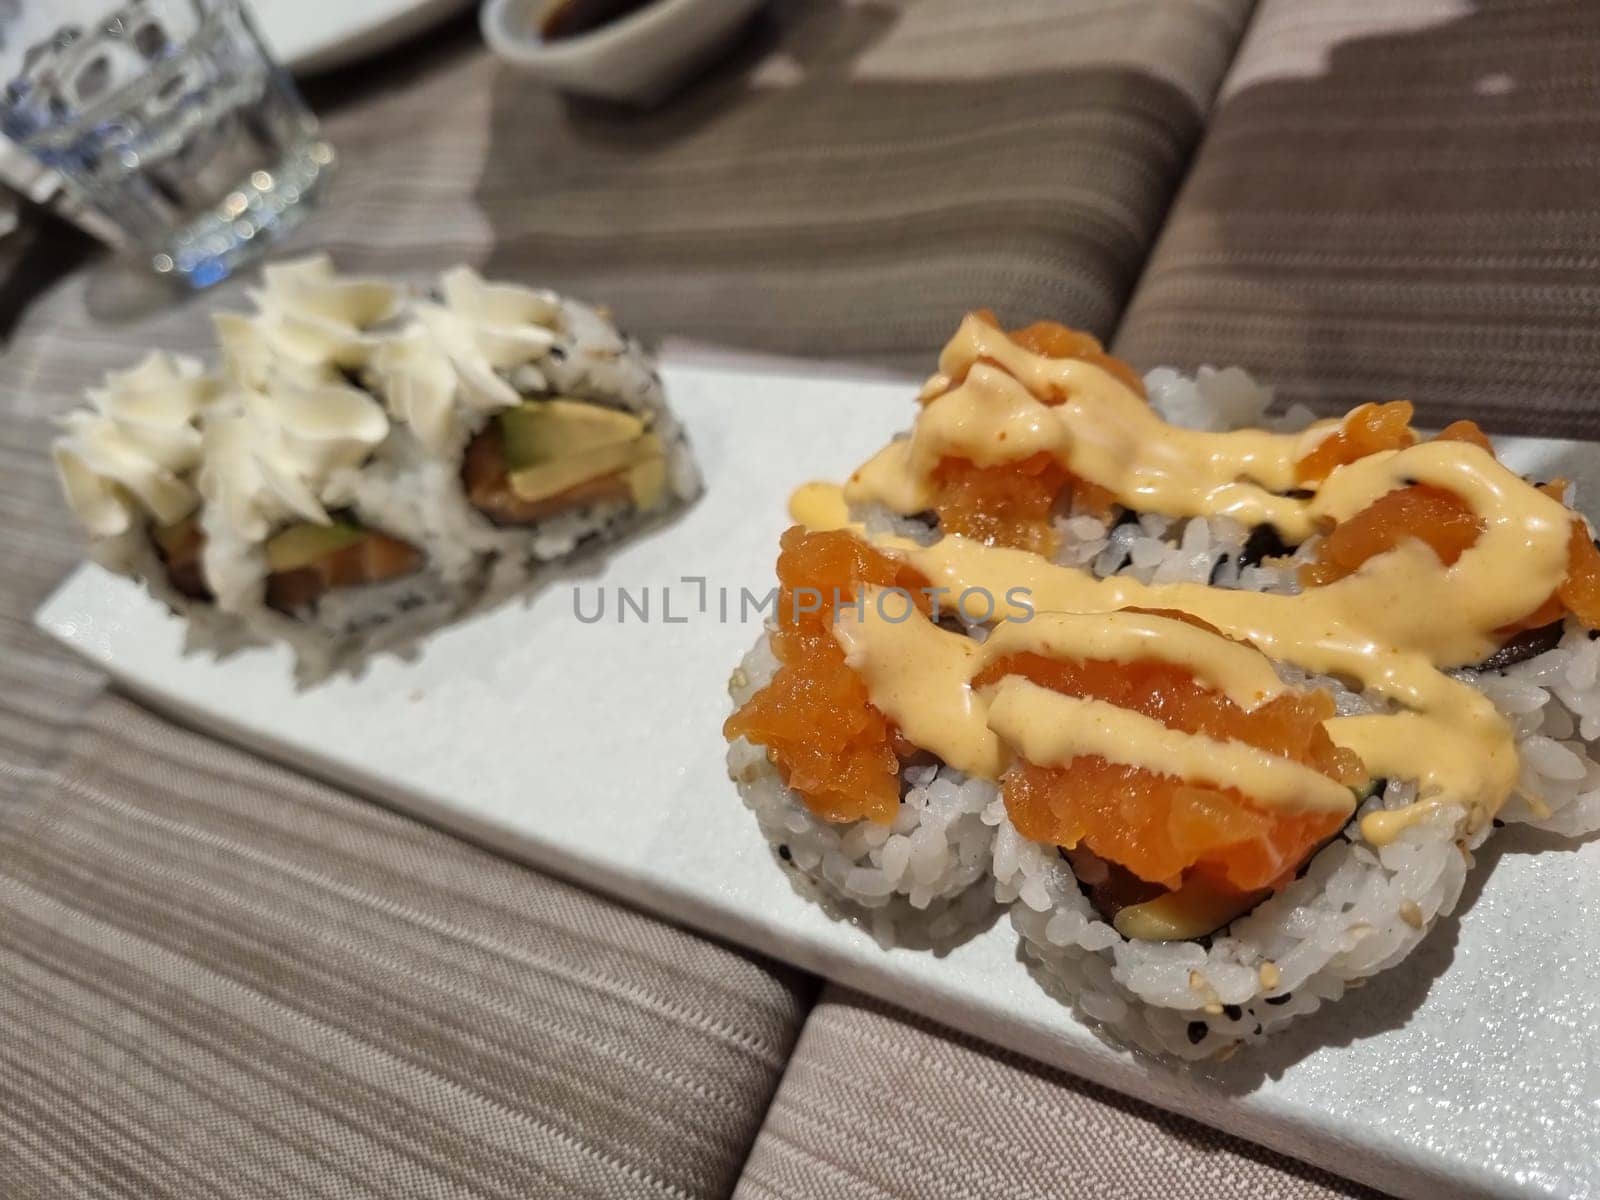 Close-up of an elegant and delicious gourmet sushi platter with creamy toppings. Showcasing traditional japanese cuisine and featuring a variety of seafood rolls and rice